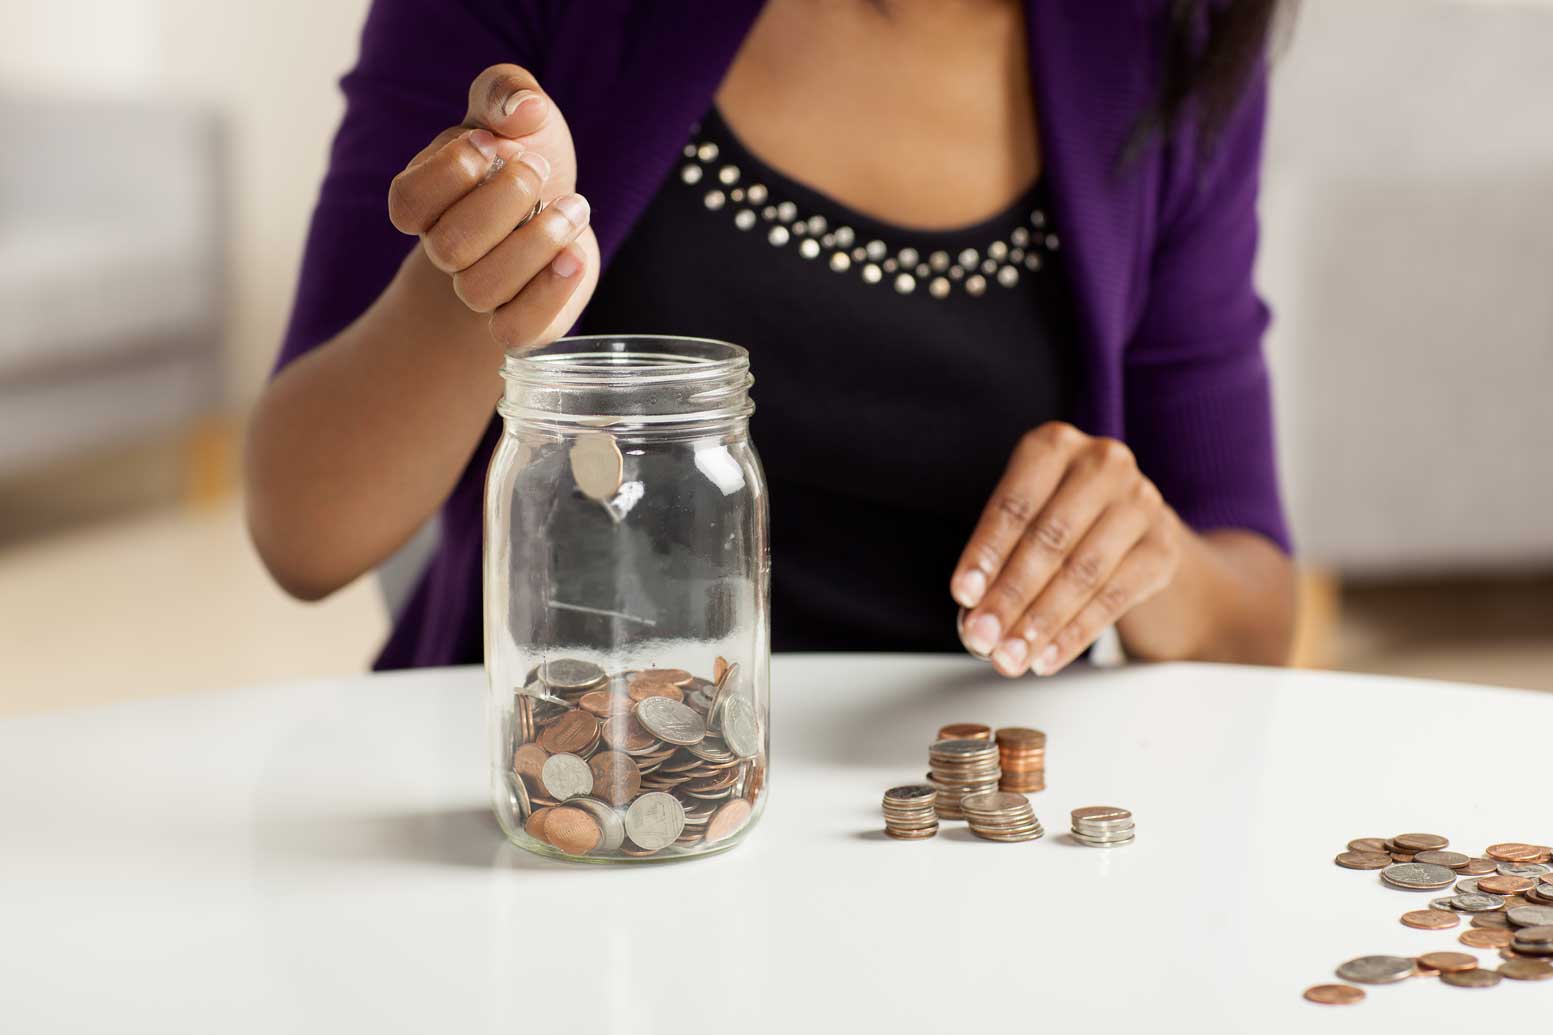 10 Simple and Unexpected Ways You Can Save Money